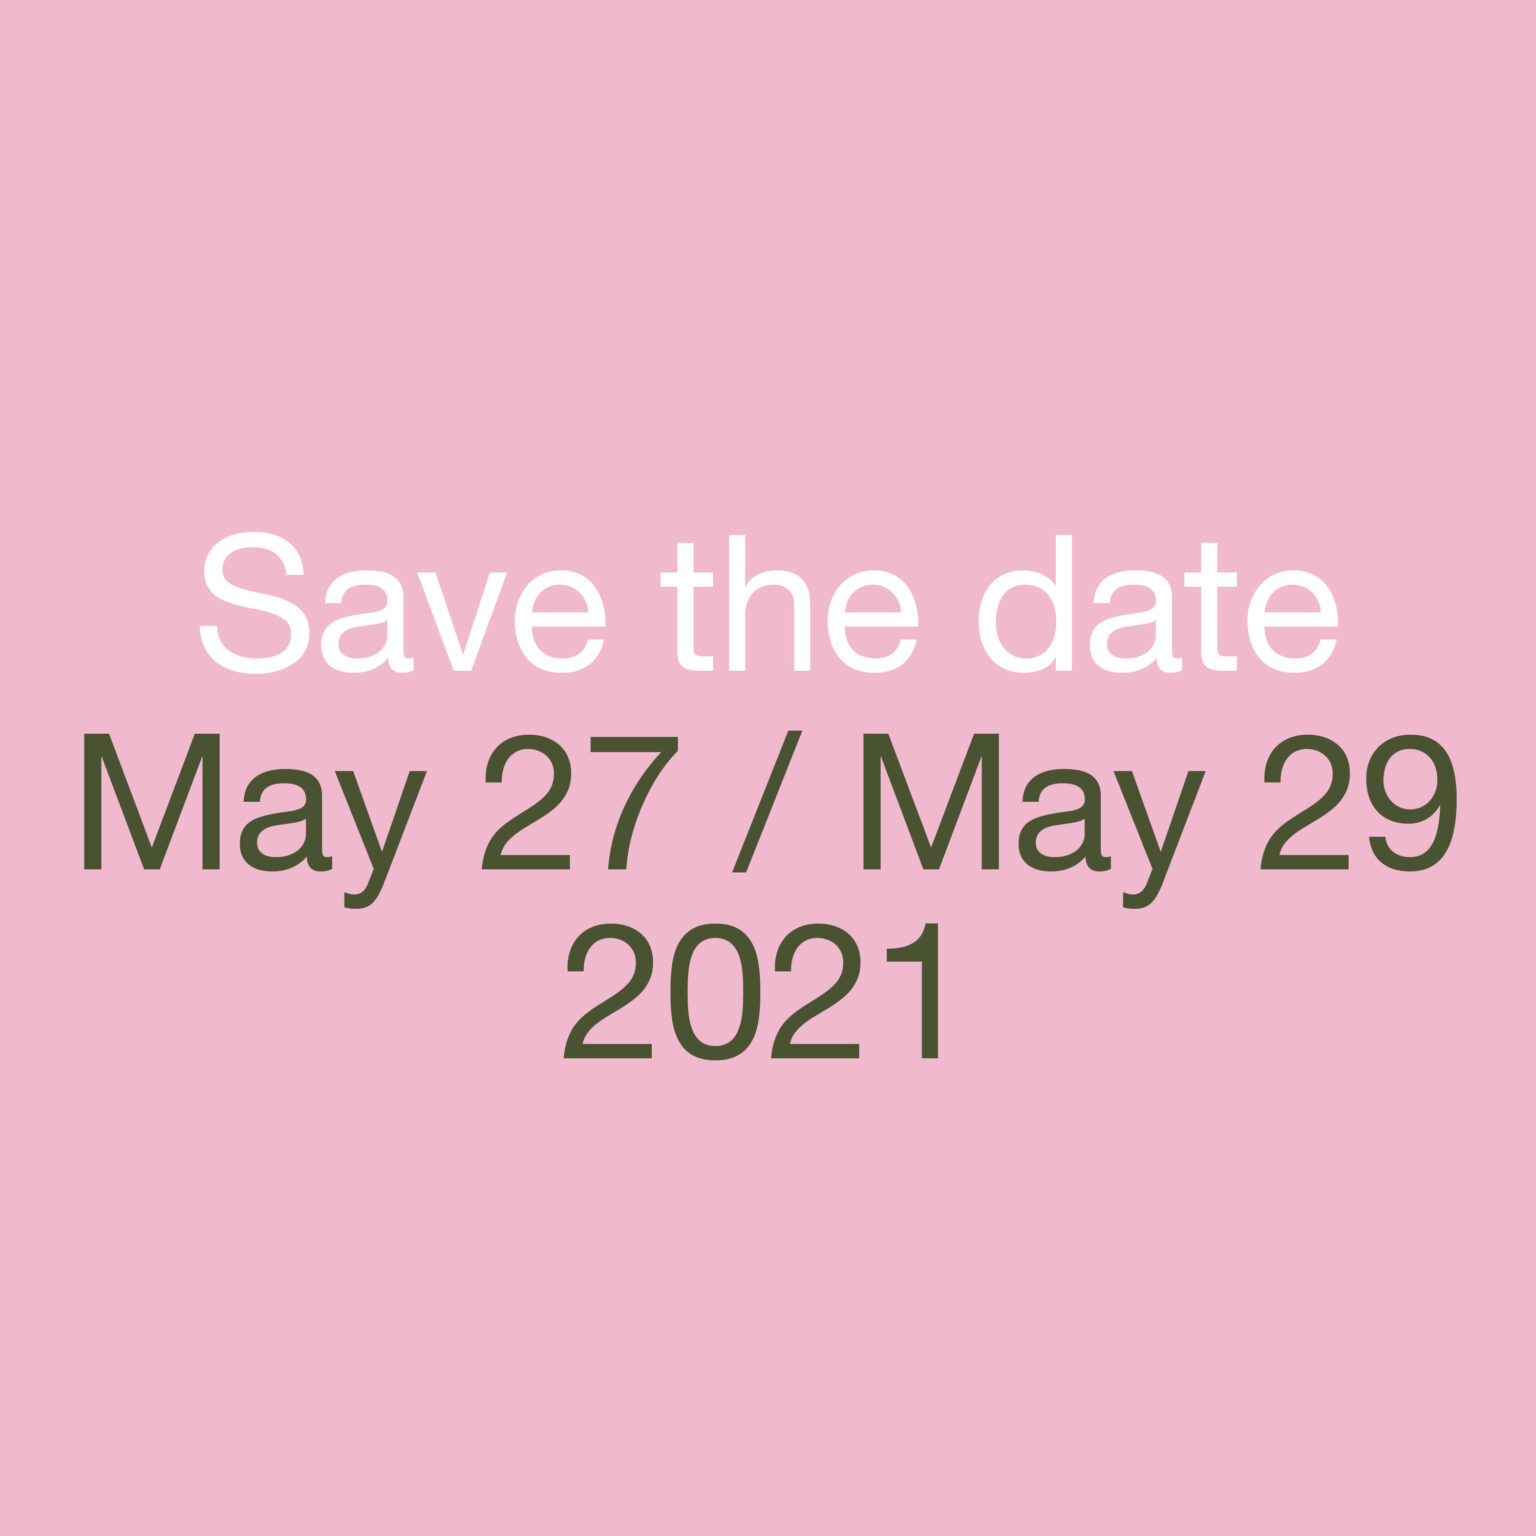 Save the date May 27 / May 29 2021 Heartland Festival